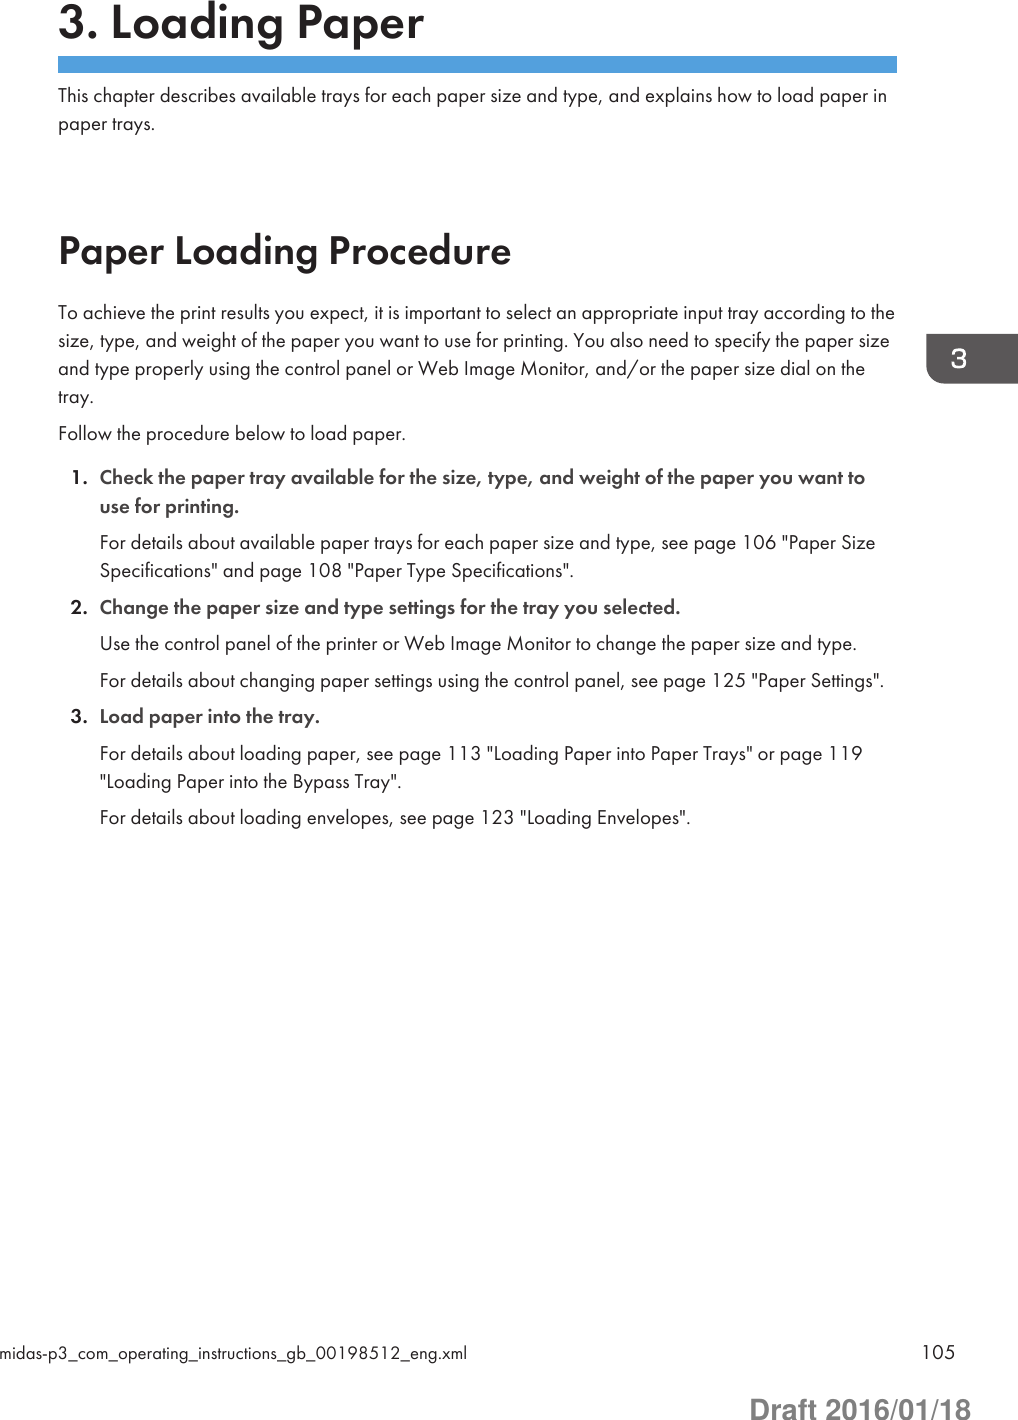 3. Loading PaperThis chapter describes available trays for each paper size and type, and explains how to load paper inpaper trays.Paper Loading ProcedureTo achieve the print results you expect, it is important to select an appropriate input tray according to thesize, type, and weight of the paper you want to use for printing. You also need to specify the paper sizeand type properly using the control panel or Web Image Monitor, and/or the paper size dial on thetray.Follow the procedure below to load paper.1. Check the paper tray available for the size, type, and weight of the paper you want touse for printing.For details about available paper trays for each paper size and type, see page 106 &quot;Paper SizeSpecifications&quot; and page 108 &quot;Paper Type Specifications&quot;.2. Change the paper size and type settings for the tray you selected.Use the control panel of the printer or Web Image Monitor to change the paper size and type.For details about changing paper settings using the control panel, see page 125 &quot;Paper Settings&quot;.3. Load paper into the tray.For details about loading paper, see page 113 &quot;Loading Paper into Paper Trays&quot; or page 119&quot;Loading Paper into the Bypass Tray&quot;.For details about loading envelopes, see page 123 &quot;Loading Envelopes&quot;.midas-p3_com_operating_instructions_gb_00198512_eng.xml 105Draft 2016/01/18